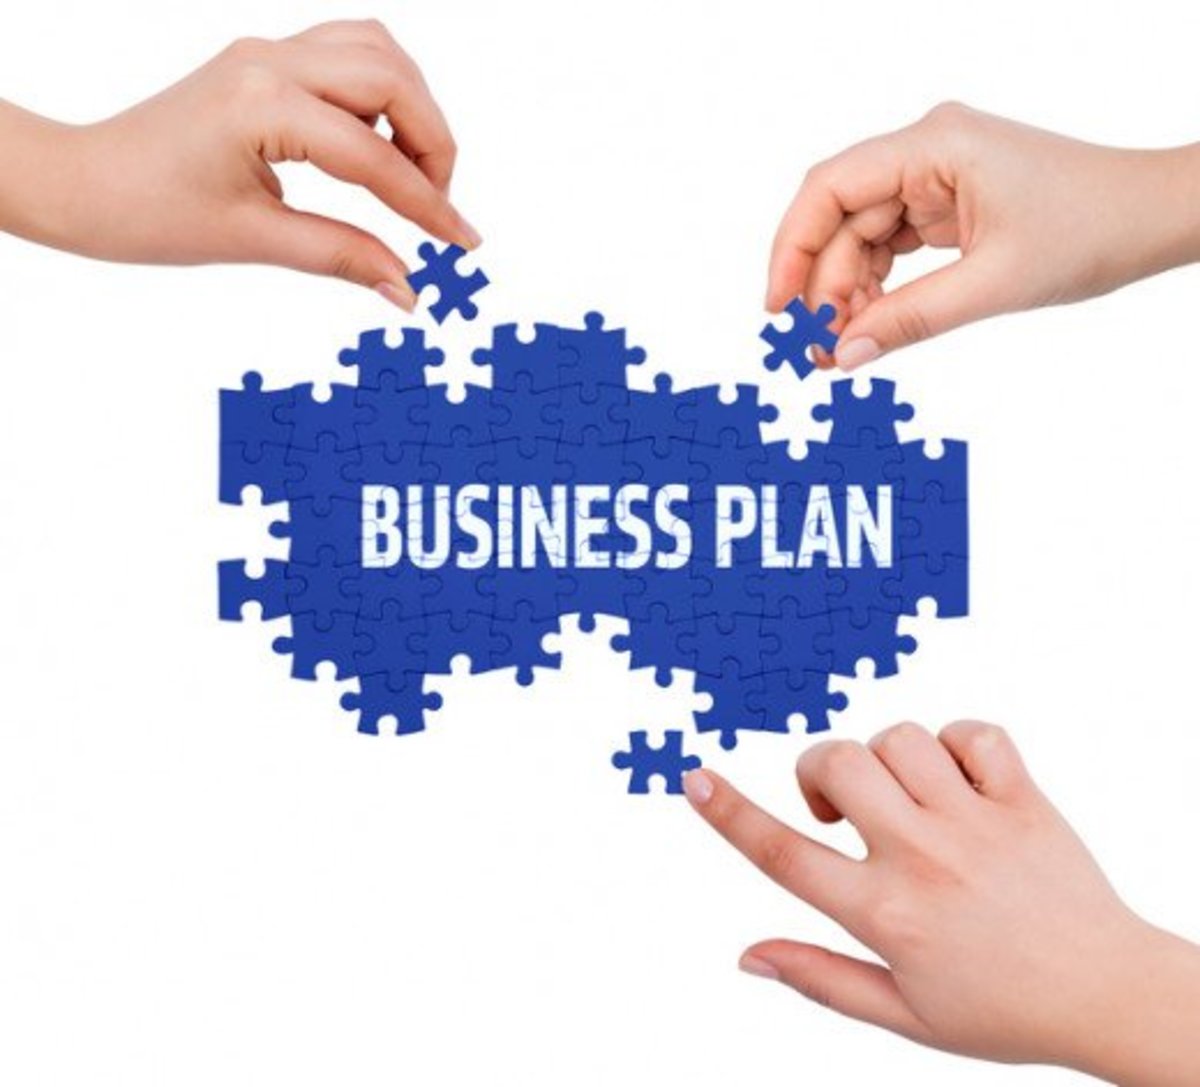 How to Come Up With Uncommon Business Idea and Write a Successful Business Plan